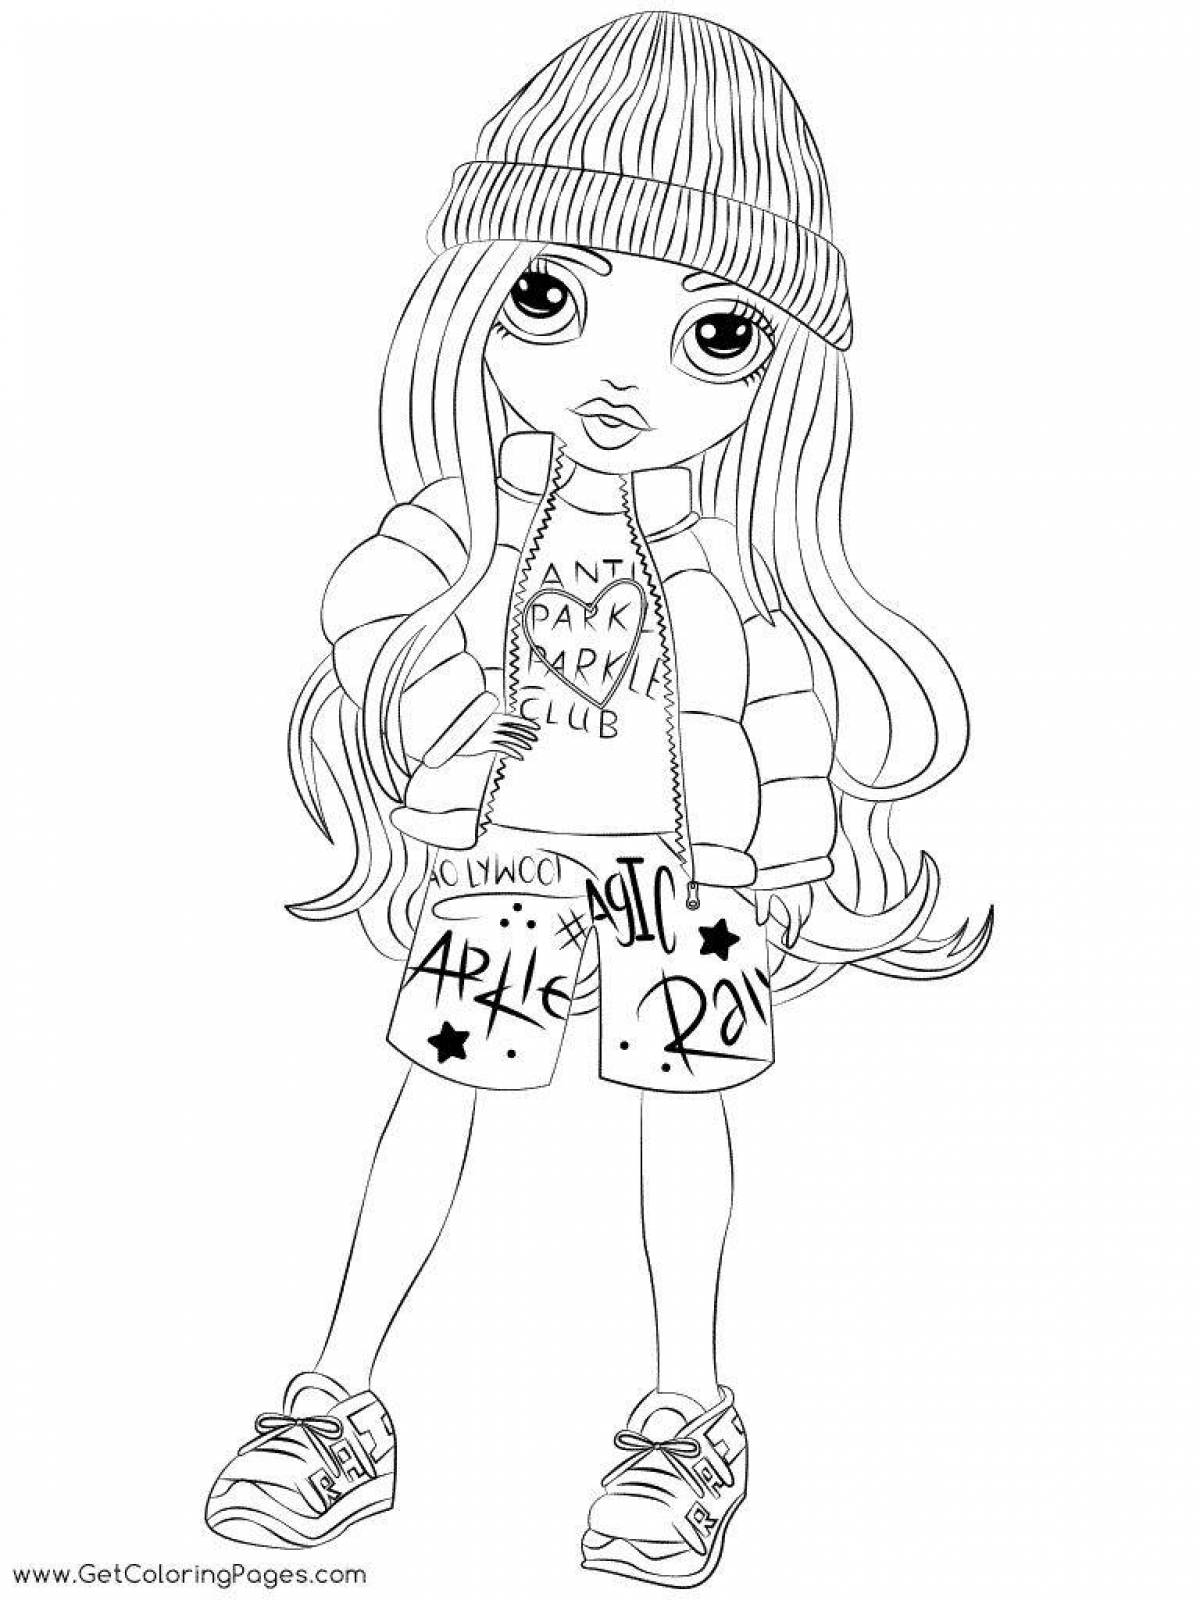 Grand Rainbow High coloring page